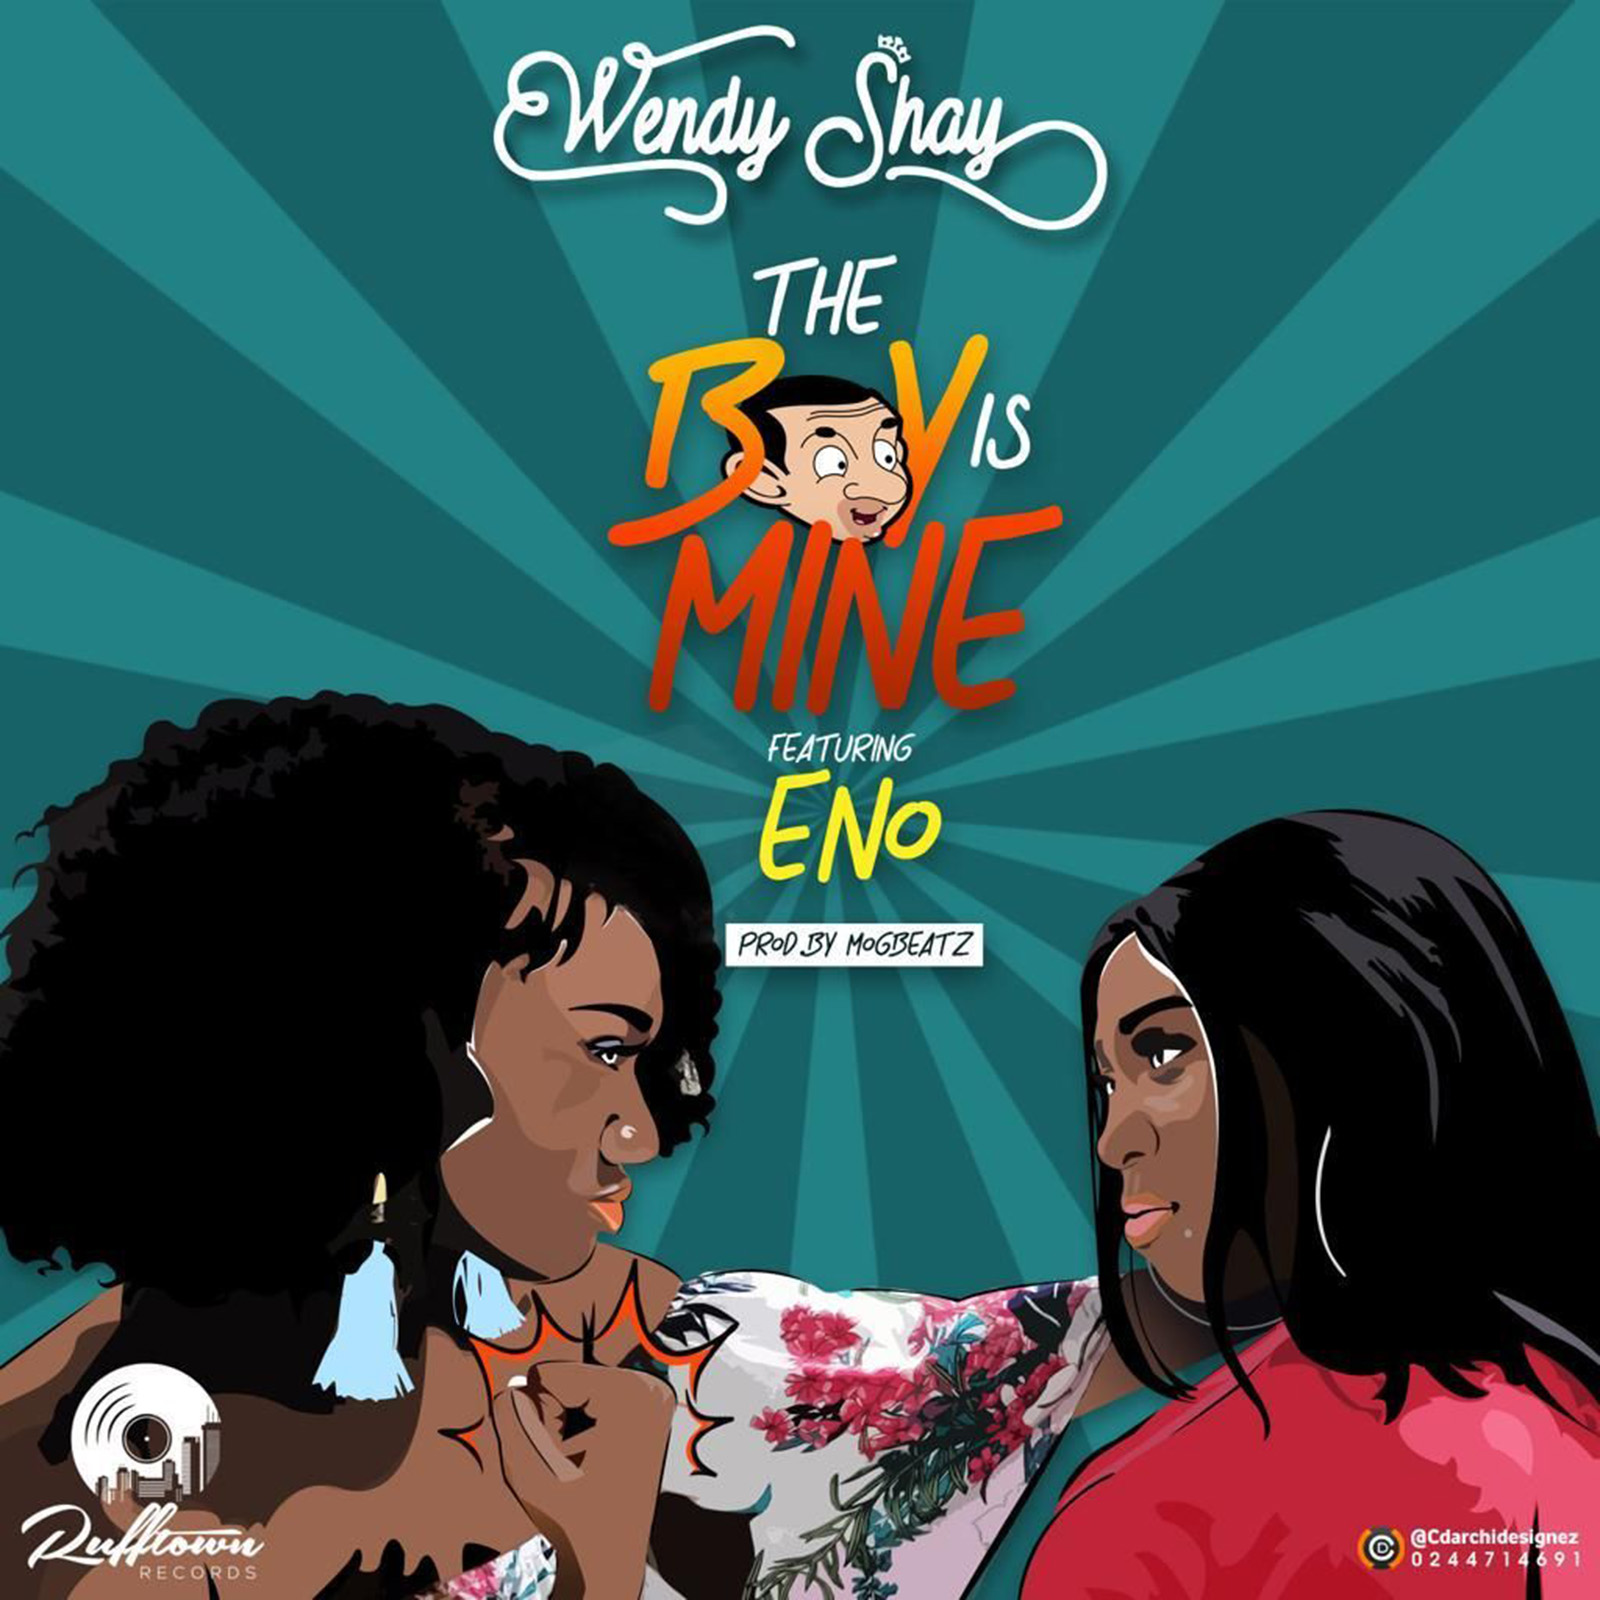 The Boy Is Mine by Wendy Shay feat. Eno